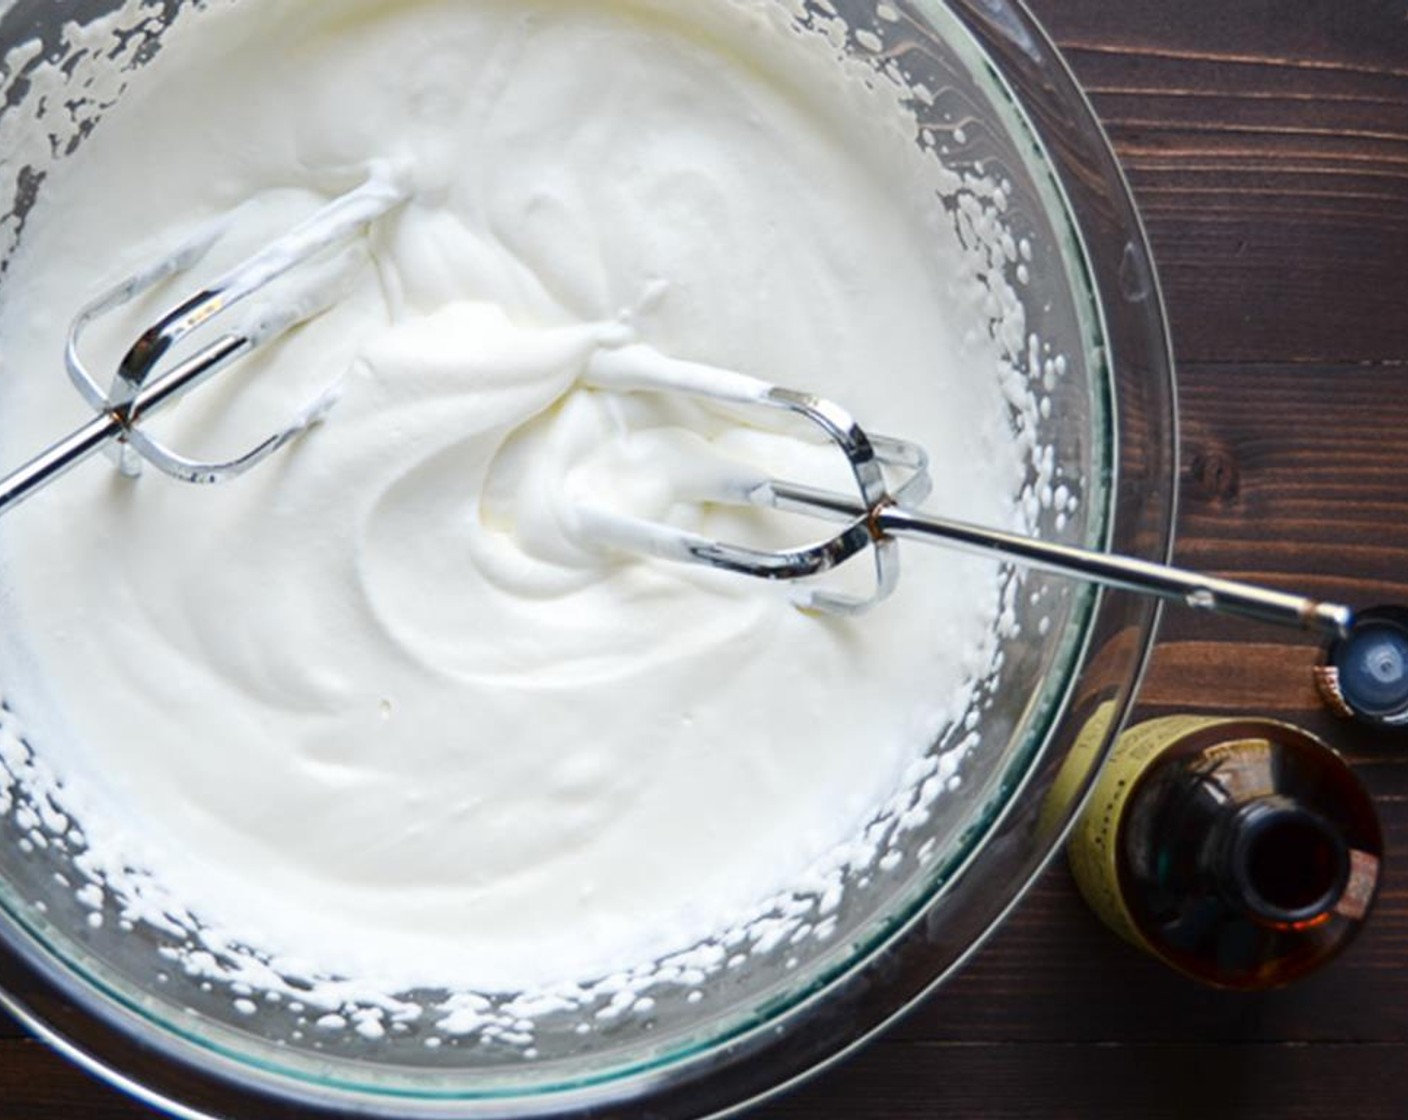 step 6 In a separate bowl, beat the Heavy Cream (1 1/2 cups) and Almond Extract (1/2 tsp).